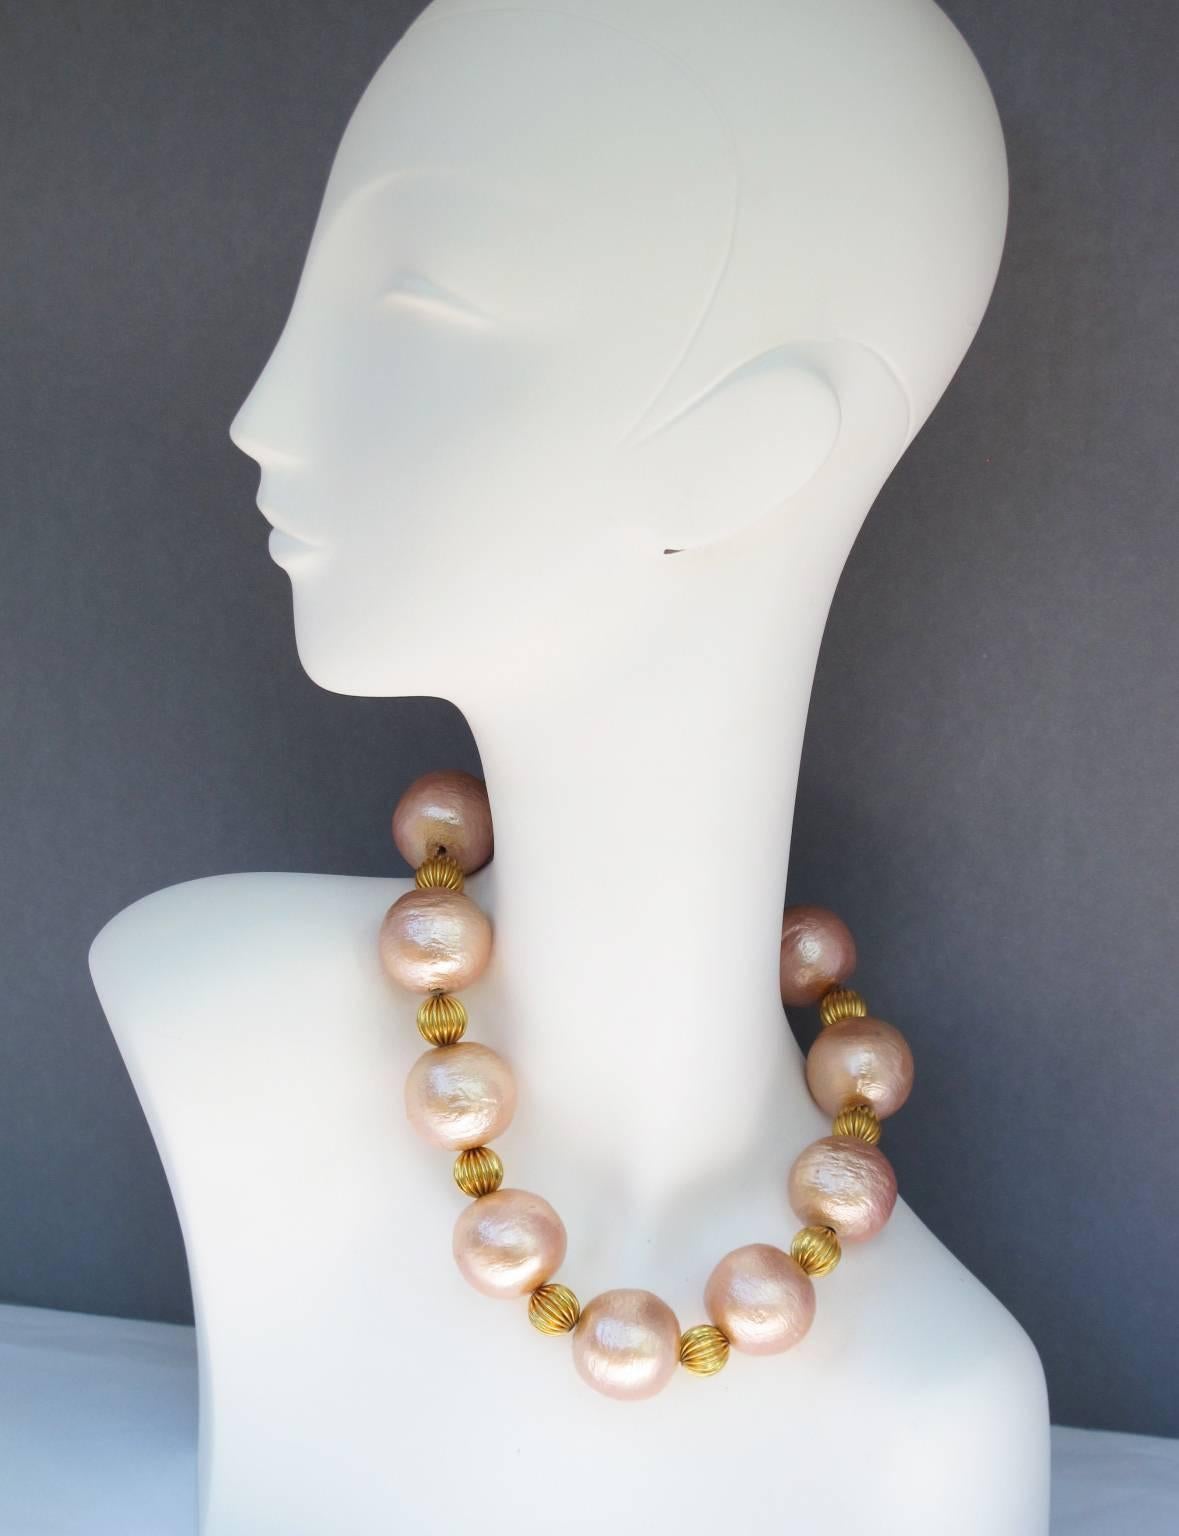 Rare GUY LAROCHE Paris signed couture choker Necklace. Elegant beaded design with huge resin beads in lovely powder pink color and with mother of pearl texture pattern compliment with gilt metal carved beads. The necklace hangs very nicely around